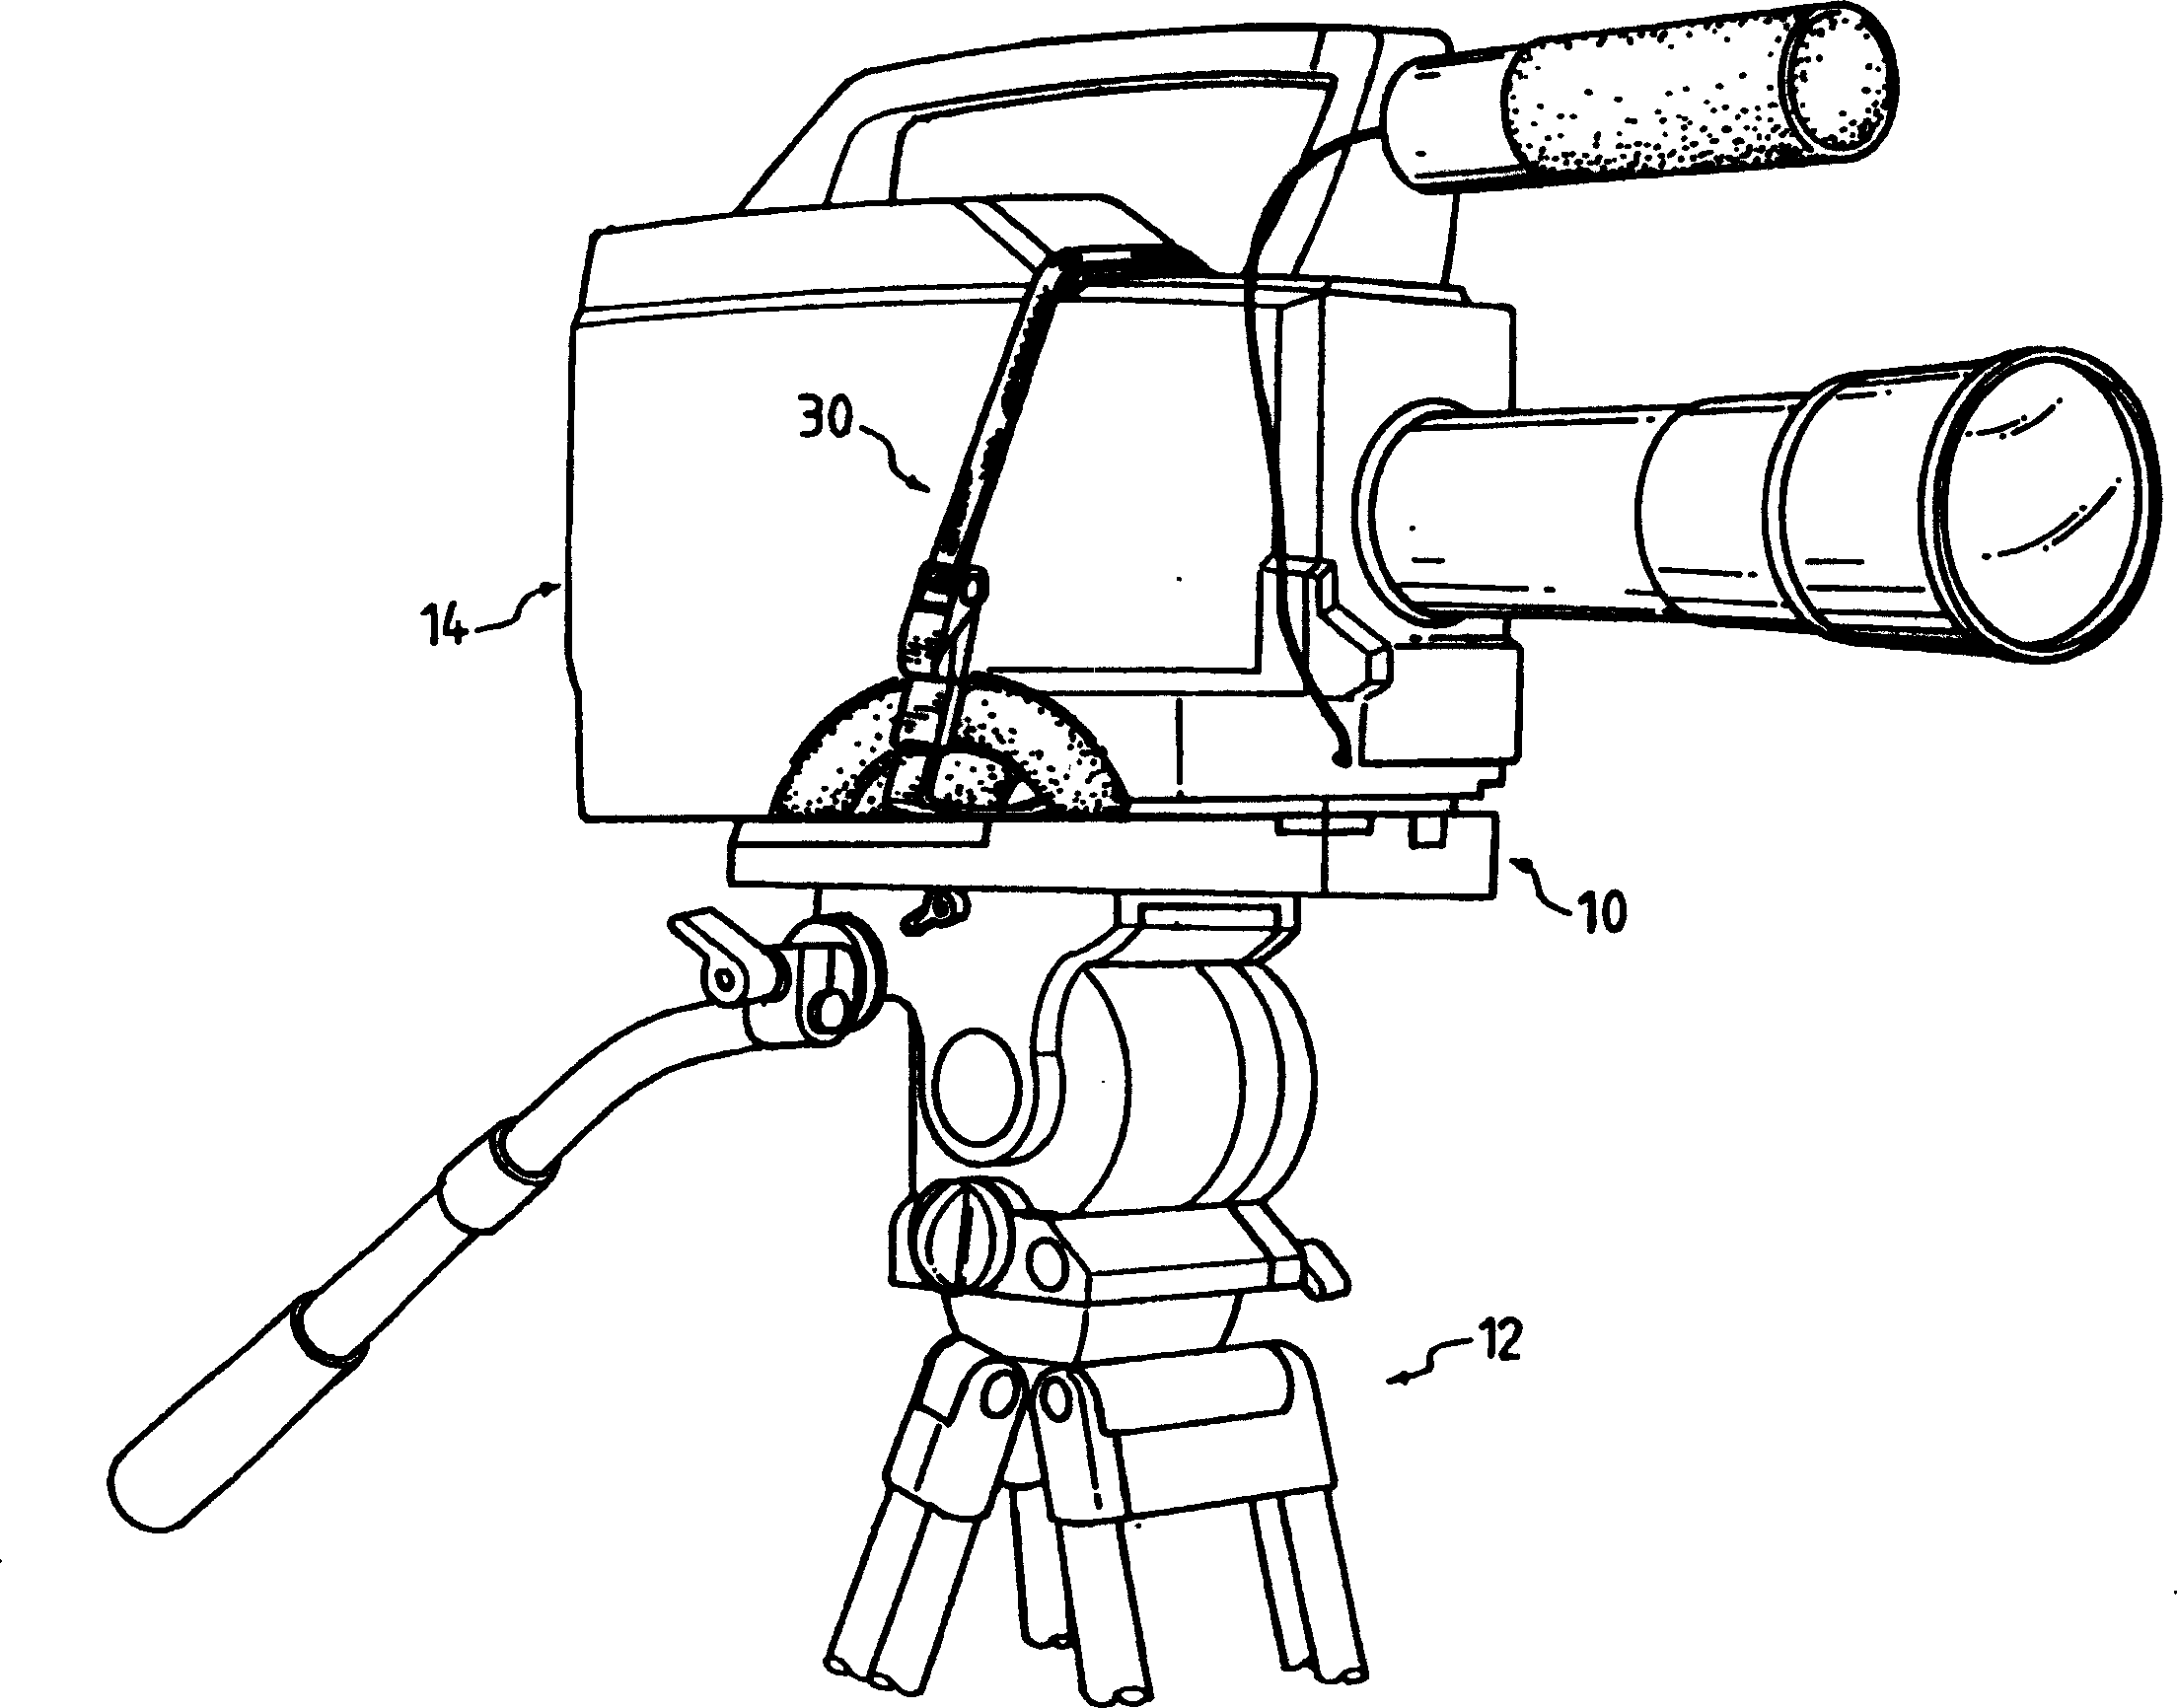 Fixture for video camera onto base board of tripod